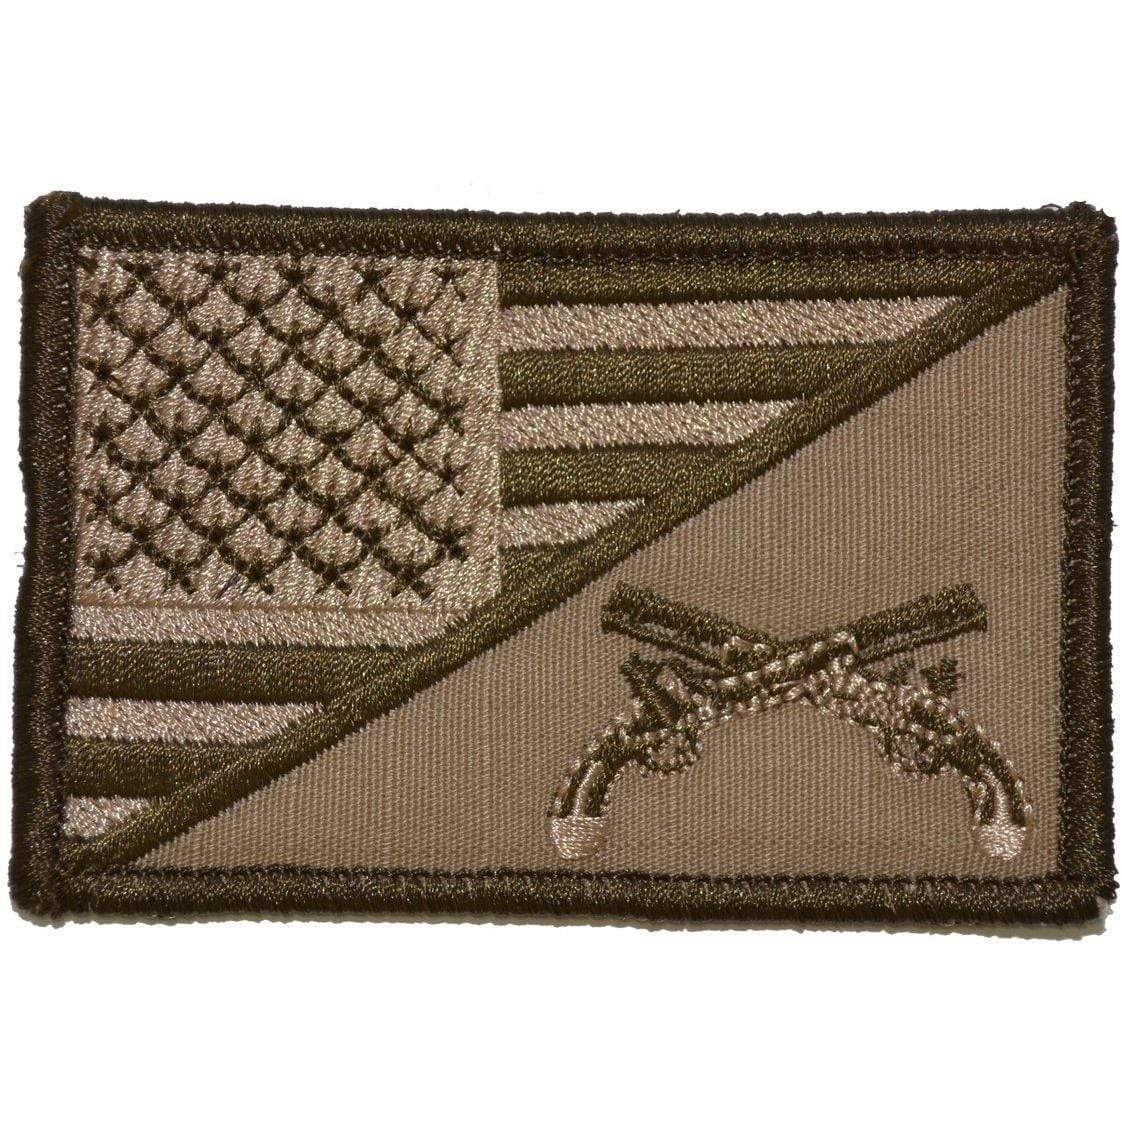 Tactical Gear Junkie Patches Coyote Brown MP Military Police USA Flag - 2.25x3.5 Patch